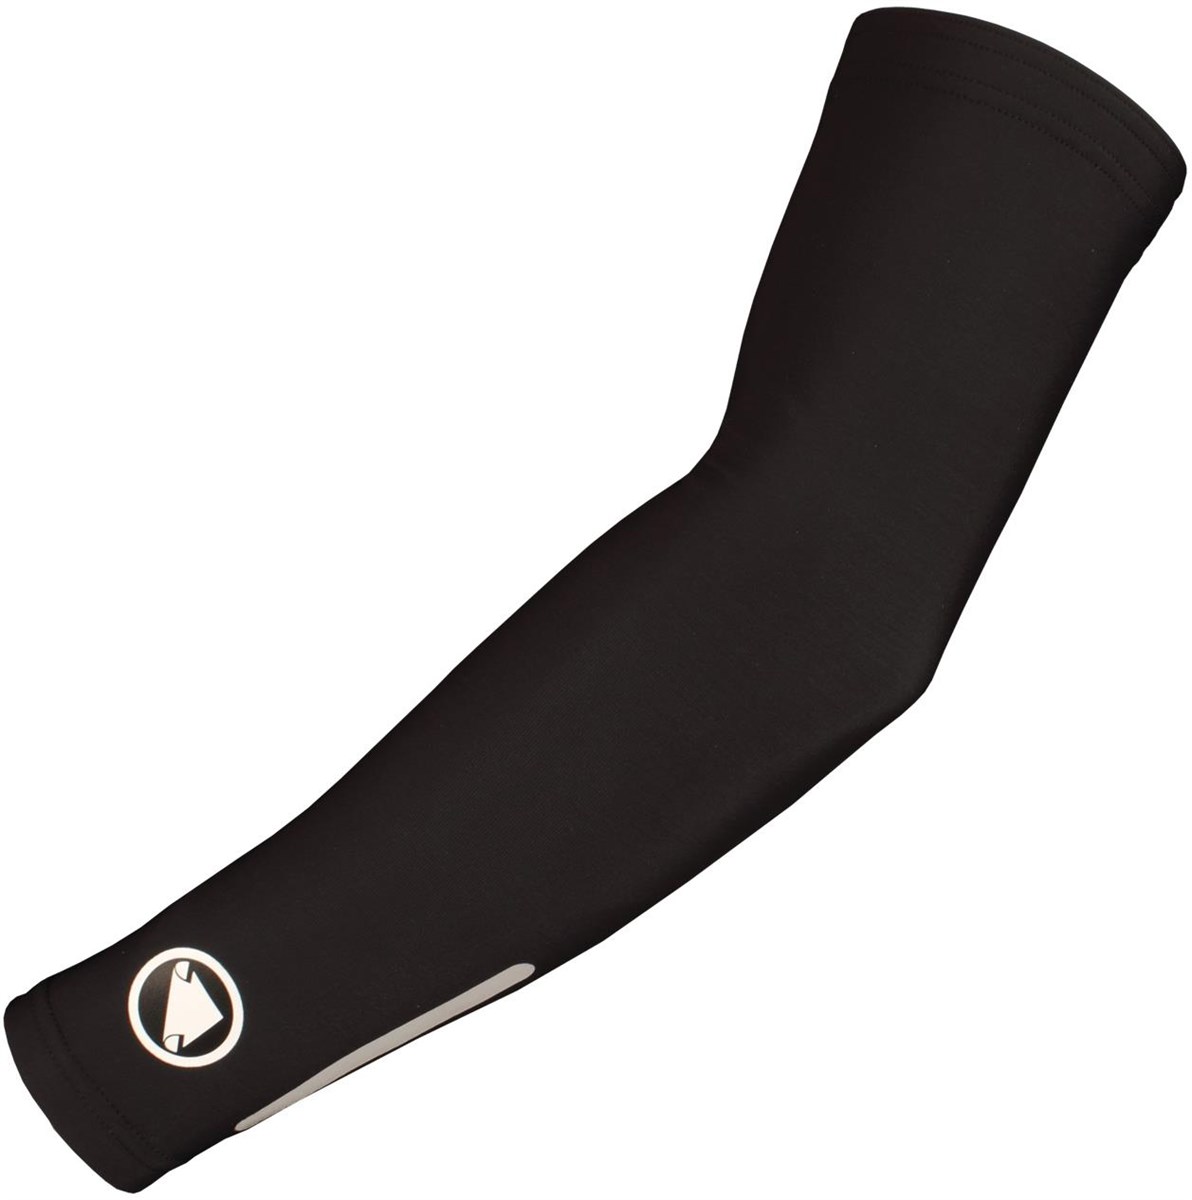 Endura Thermolite Cycling Arm Warmers product image